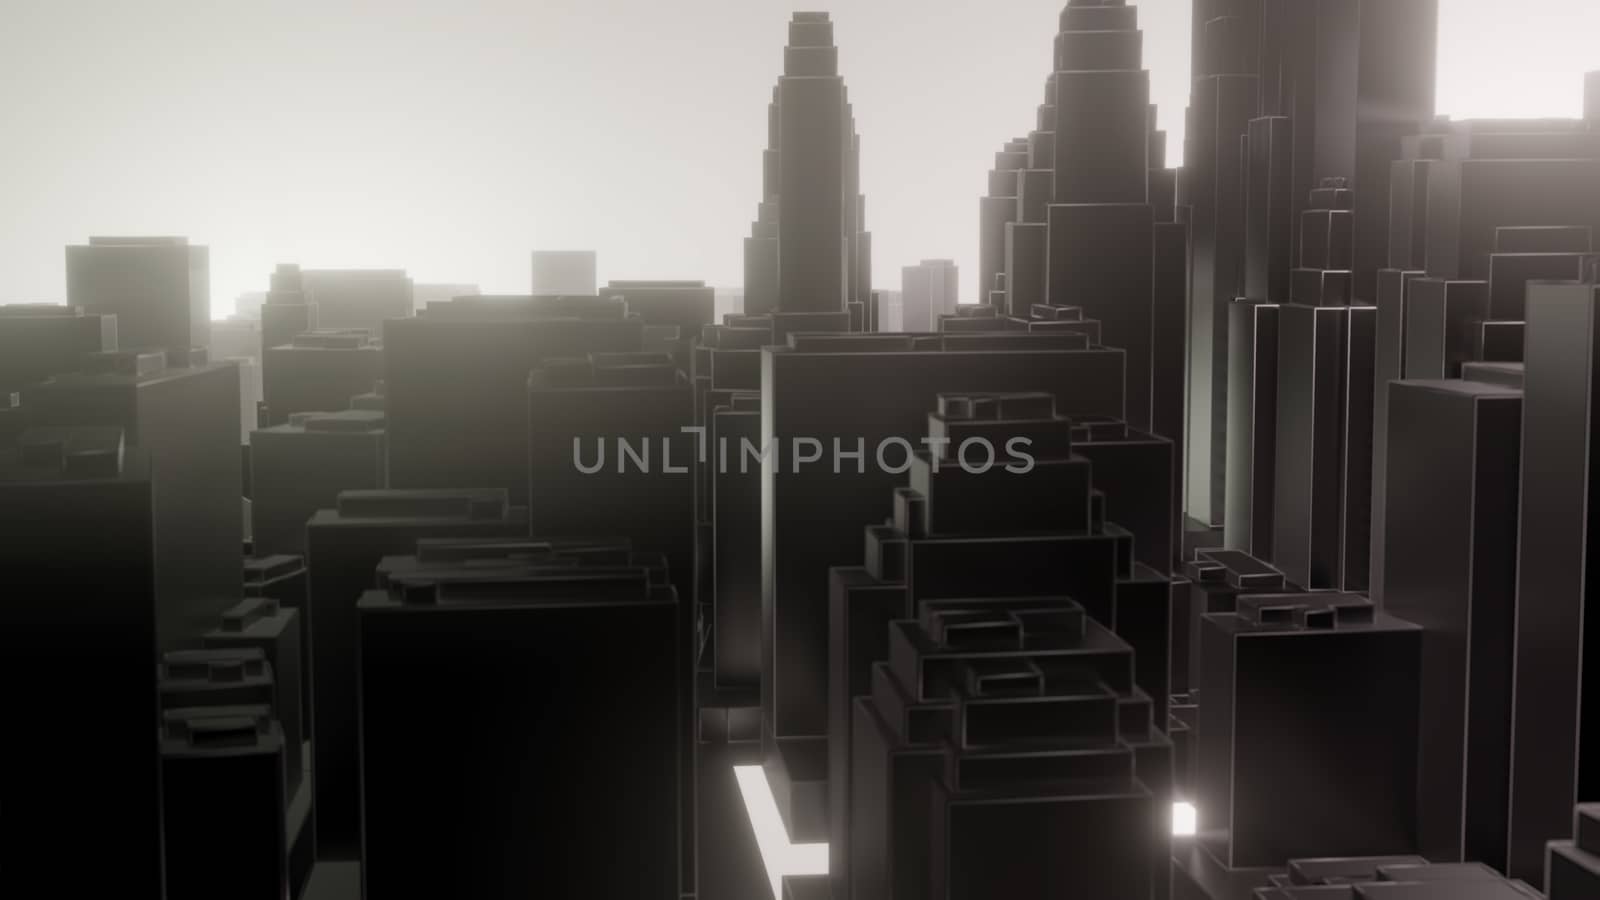 City in fog. Atmospheric emissions. 3D illustration. Concept of air pollution